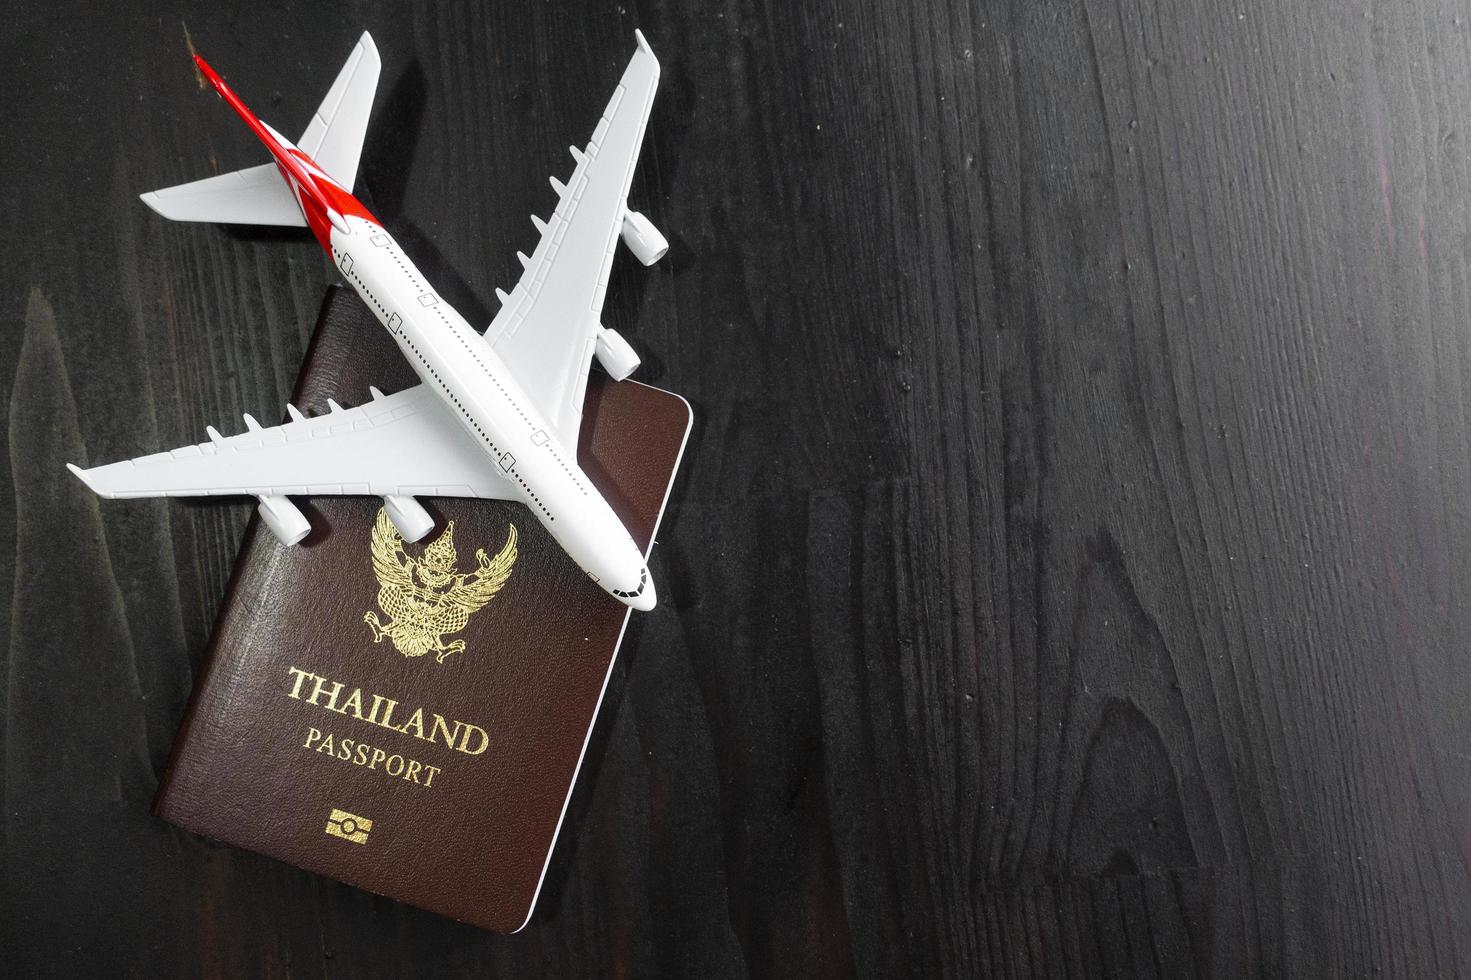 Airplane model and passport on wooden desk, ready travel concept photo